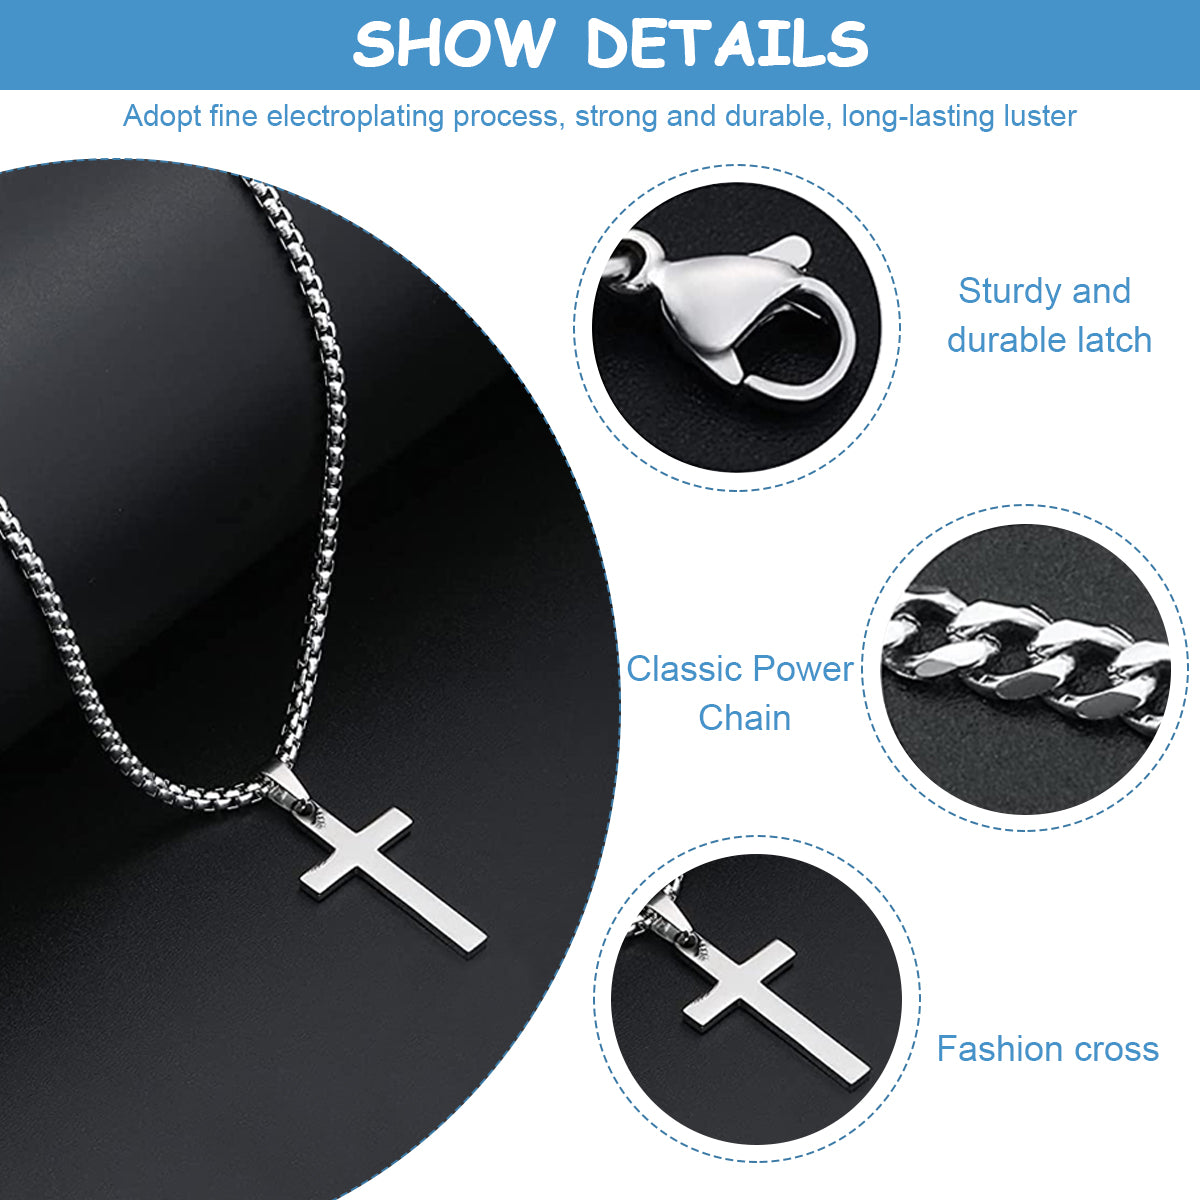 SANNIDHI 2Pcs Cross Necklaces Set Layered Chain Cross Pendant Necklace for Men Women Boys Girls, Classic Electroplated Titanium Steel Necklaces with Flannel Bag Jewelry Gifts (Silver)